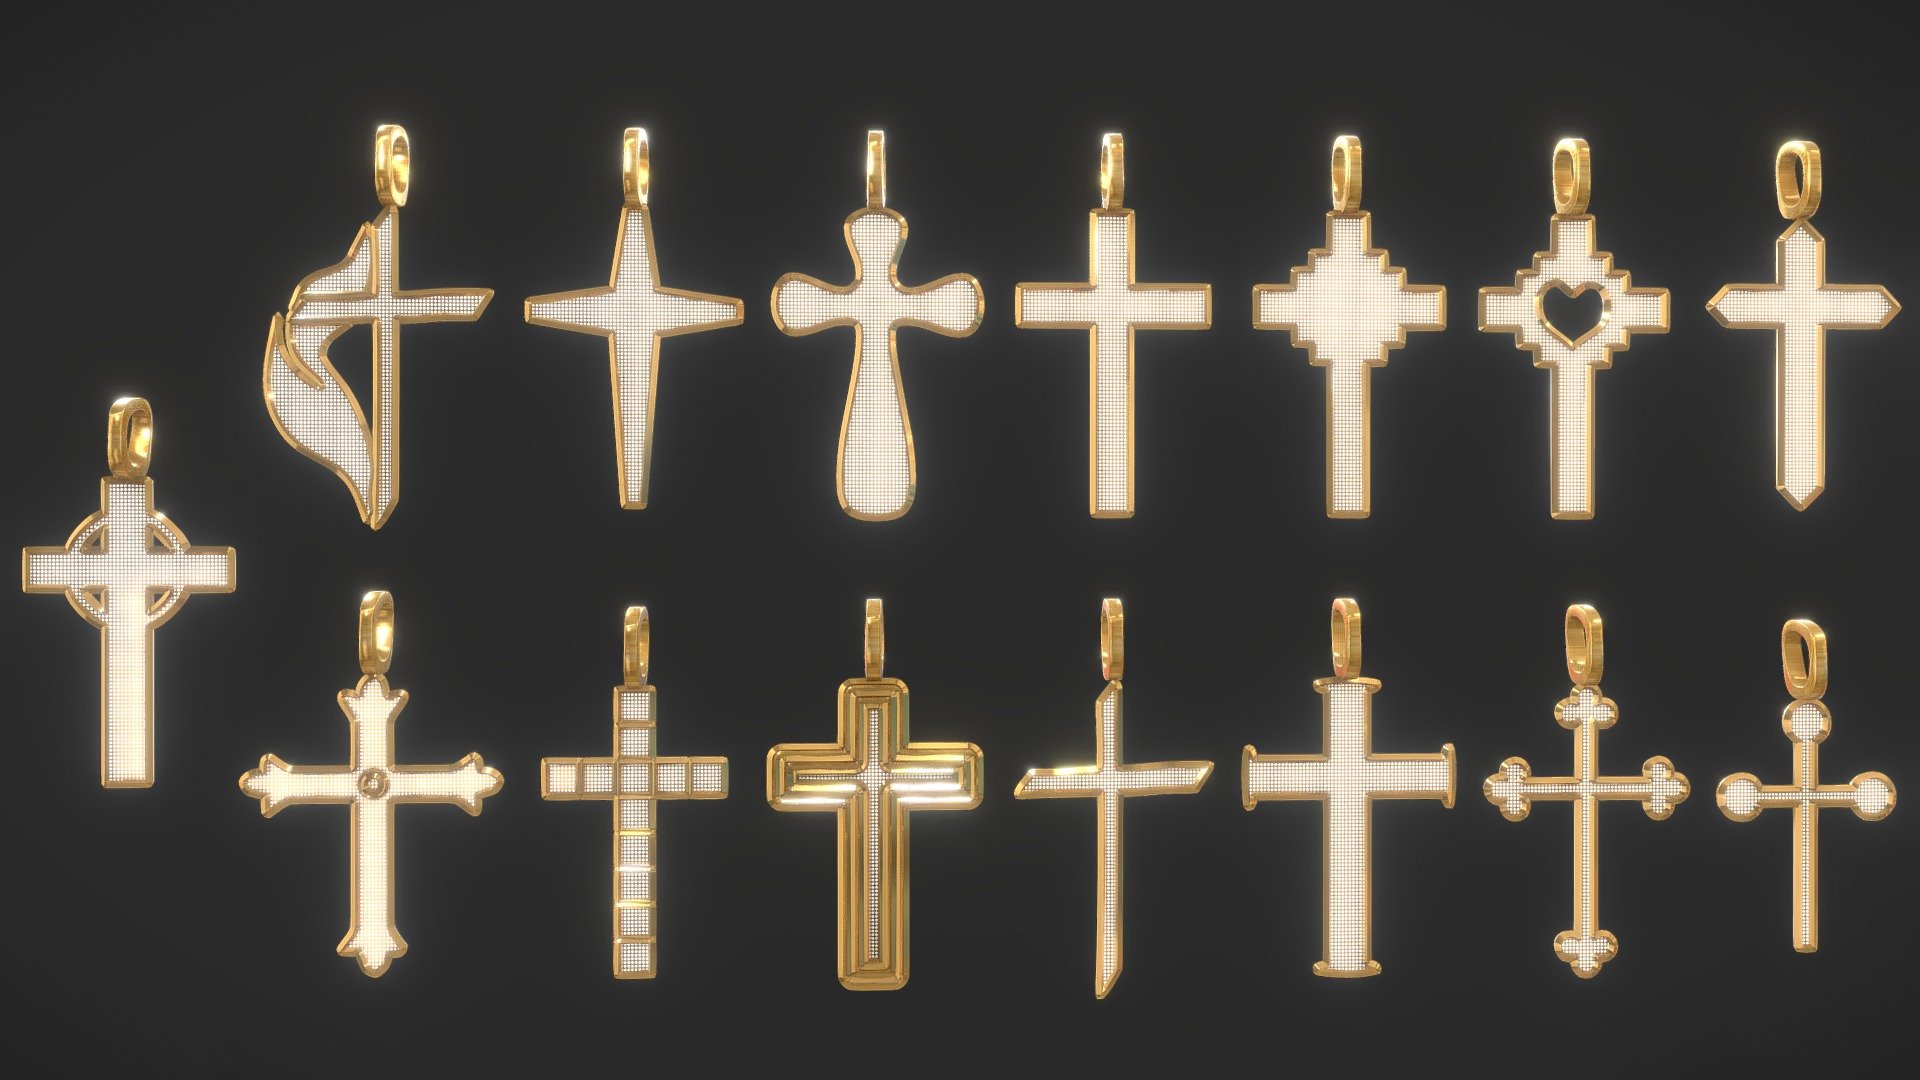 Diamond Cross Pendant pack includes : 15 highpoly cross pendants with diamond geometry and diamond material for blender!
Works great with my Diamond necklace / chains pack

Note: The diamond material is not represented in the sketchfab viewer, but looks fantastic in blender 3d model